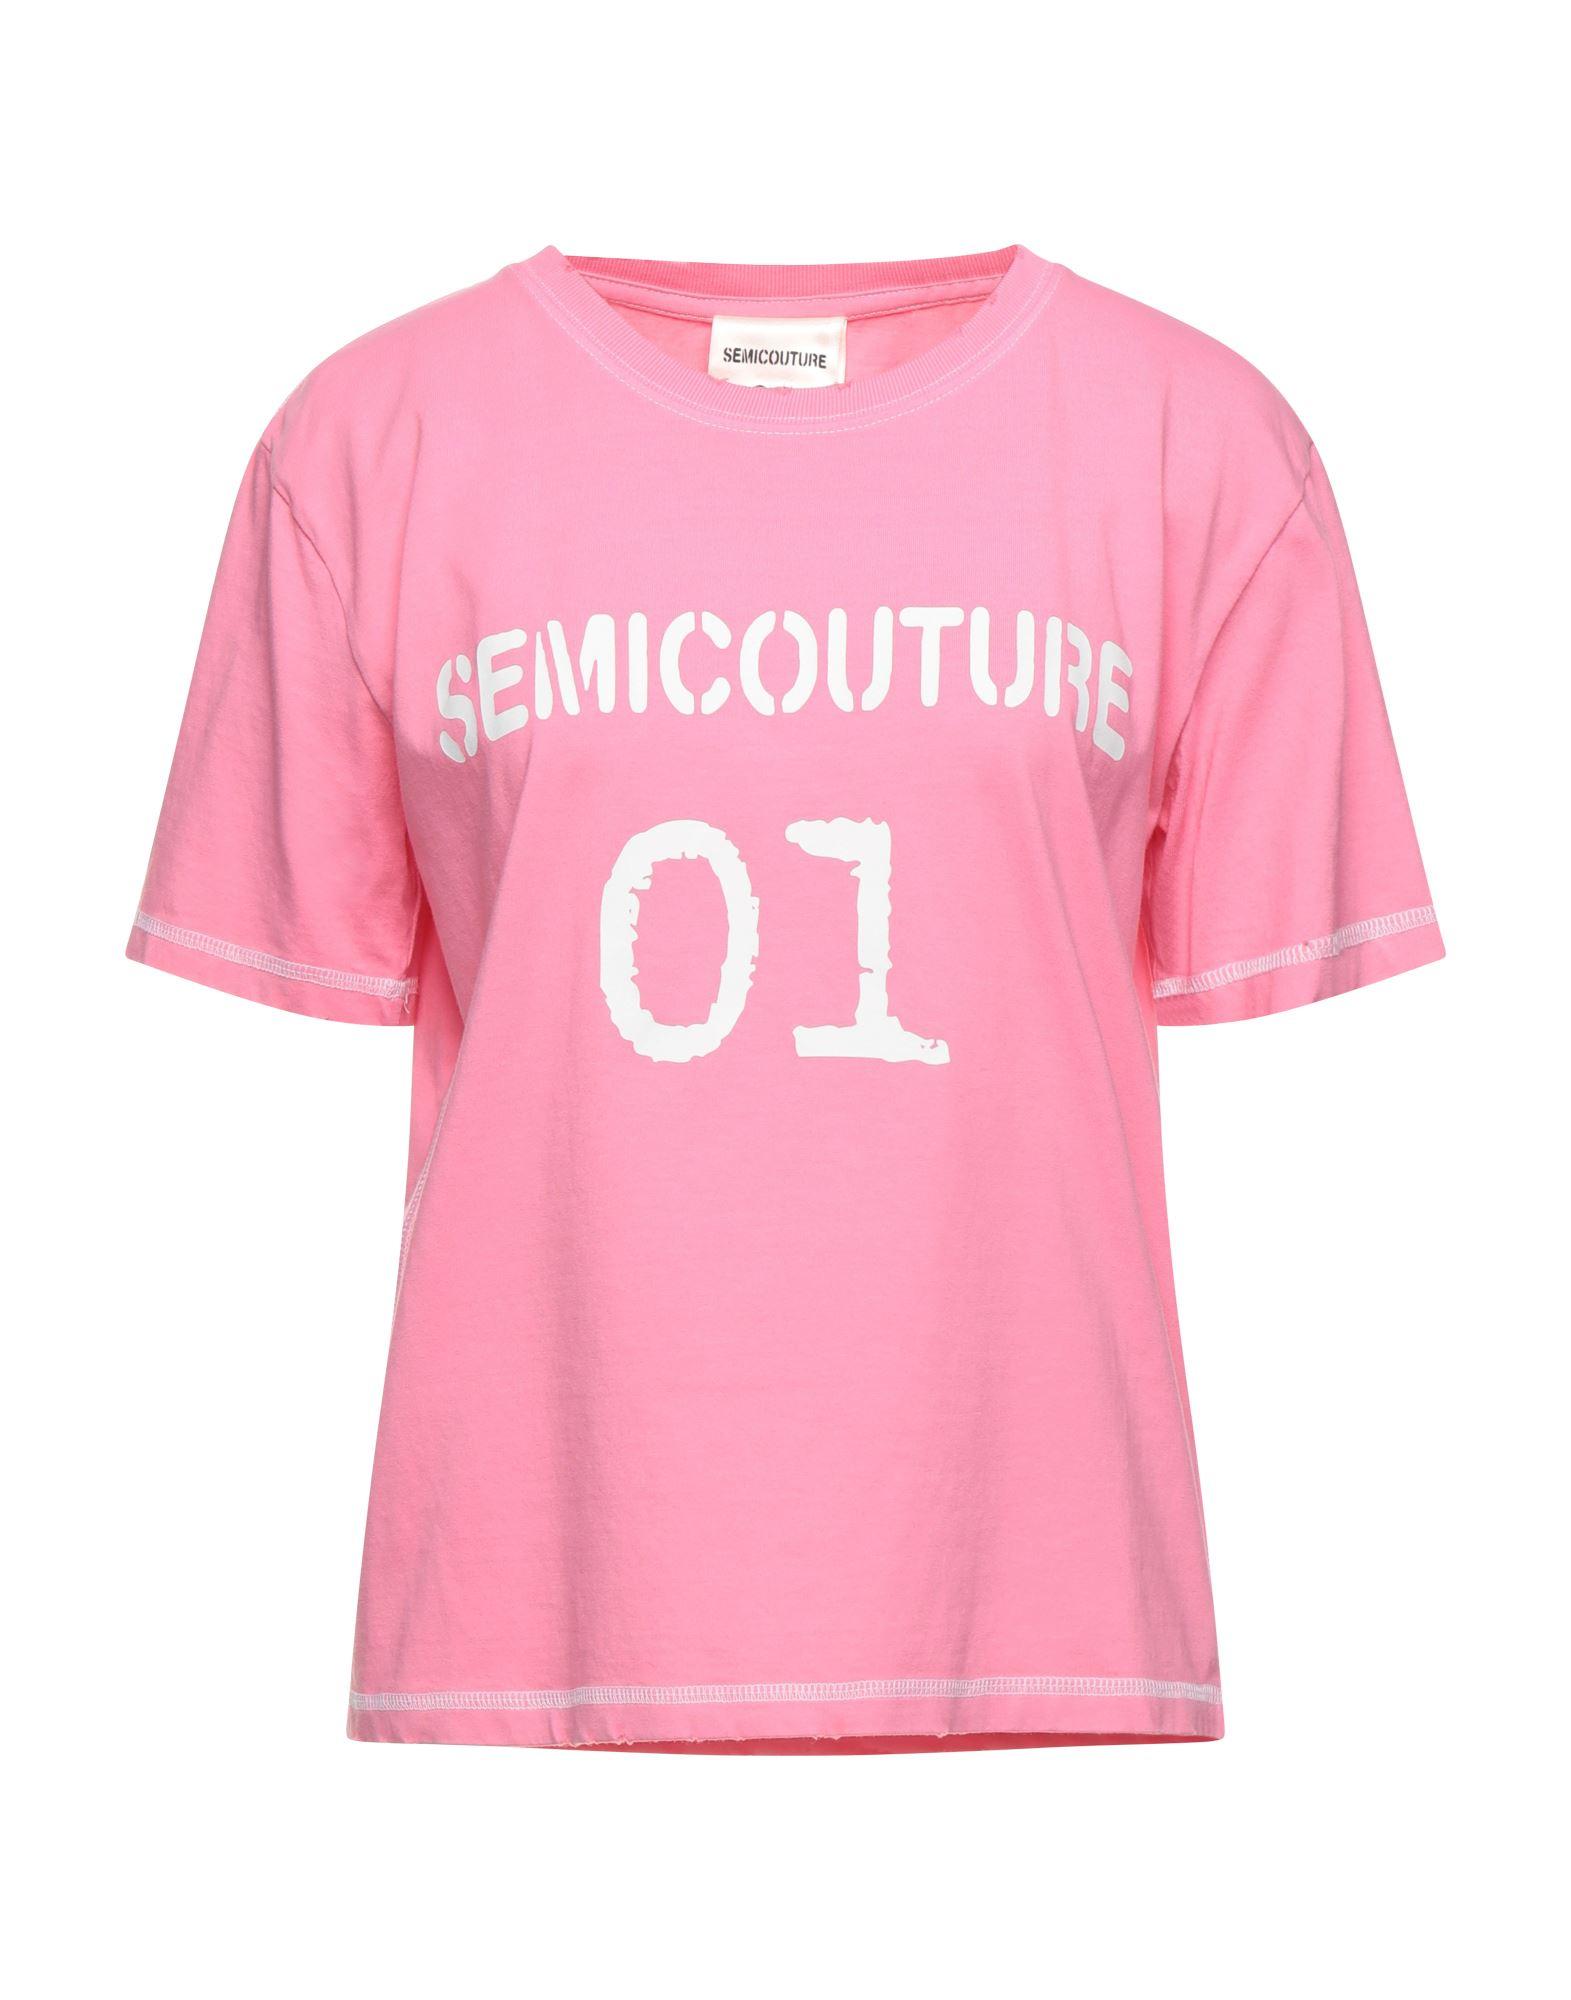 Semicouture T-shirt in Pink - Lyst